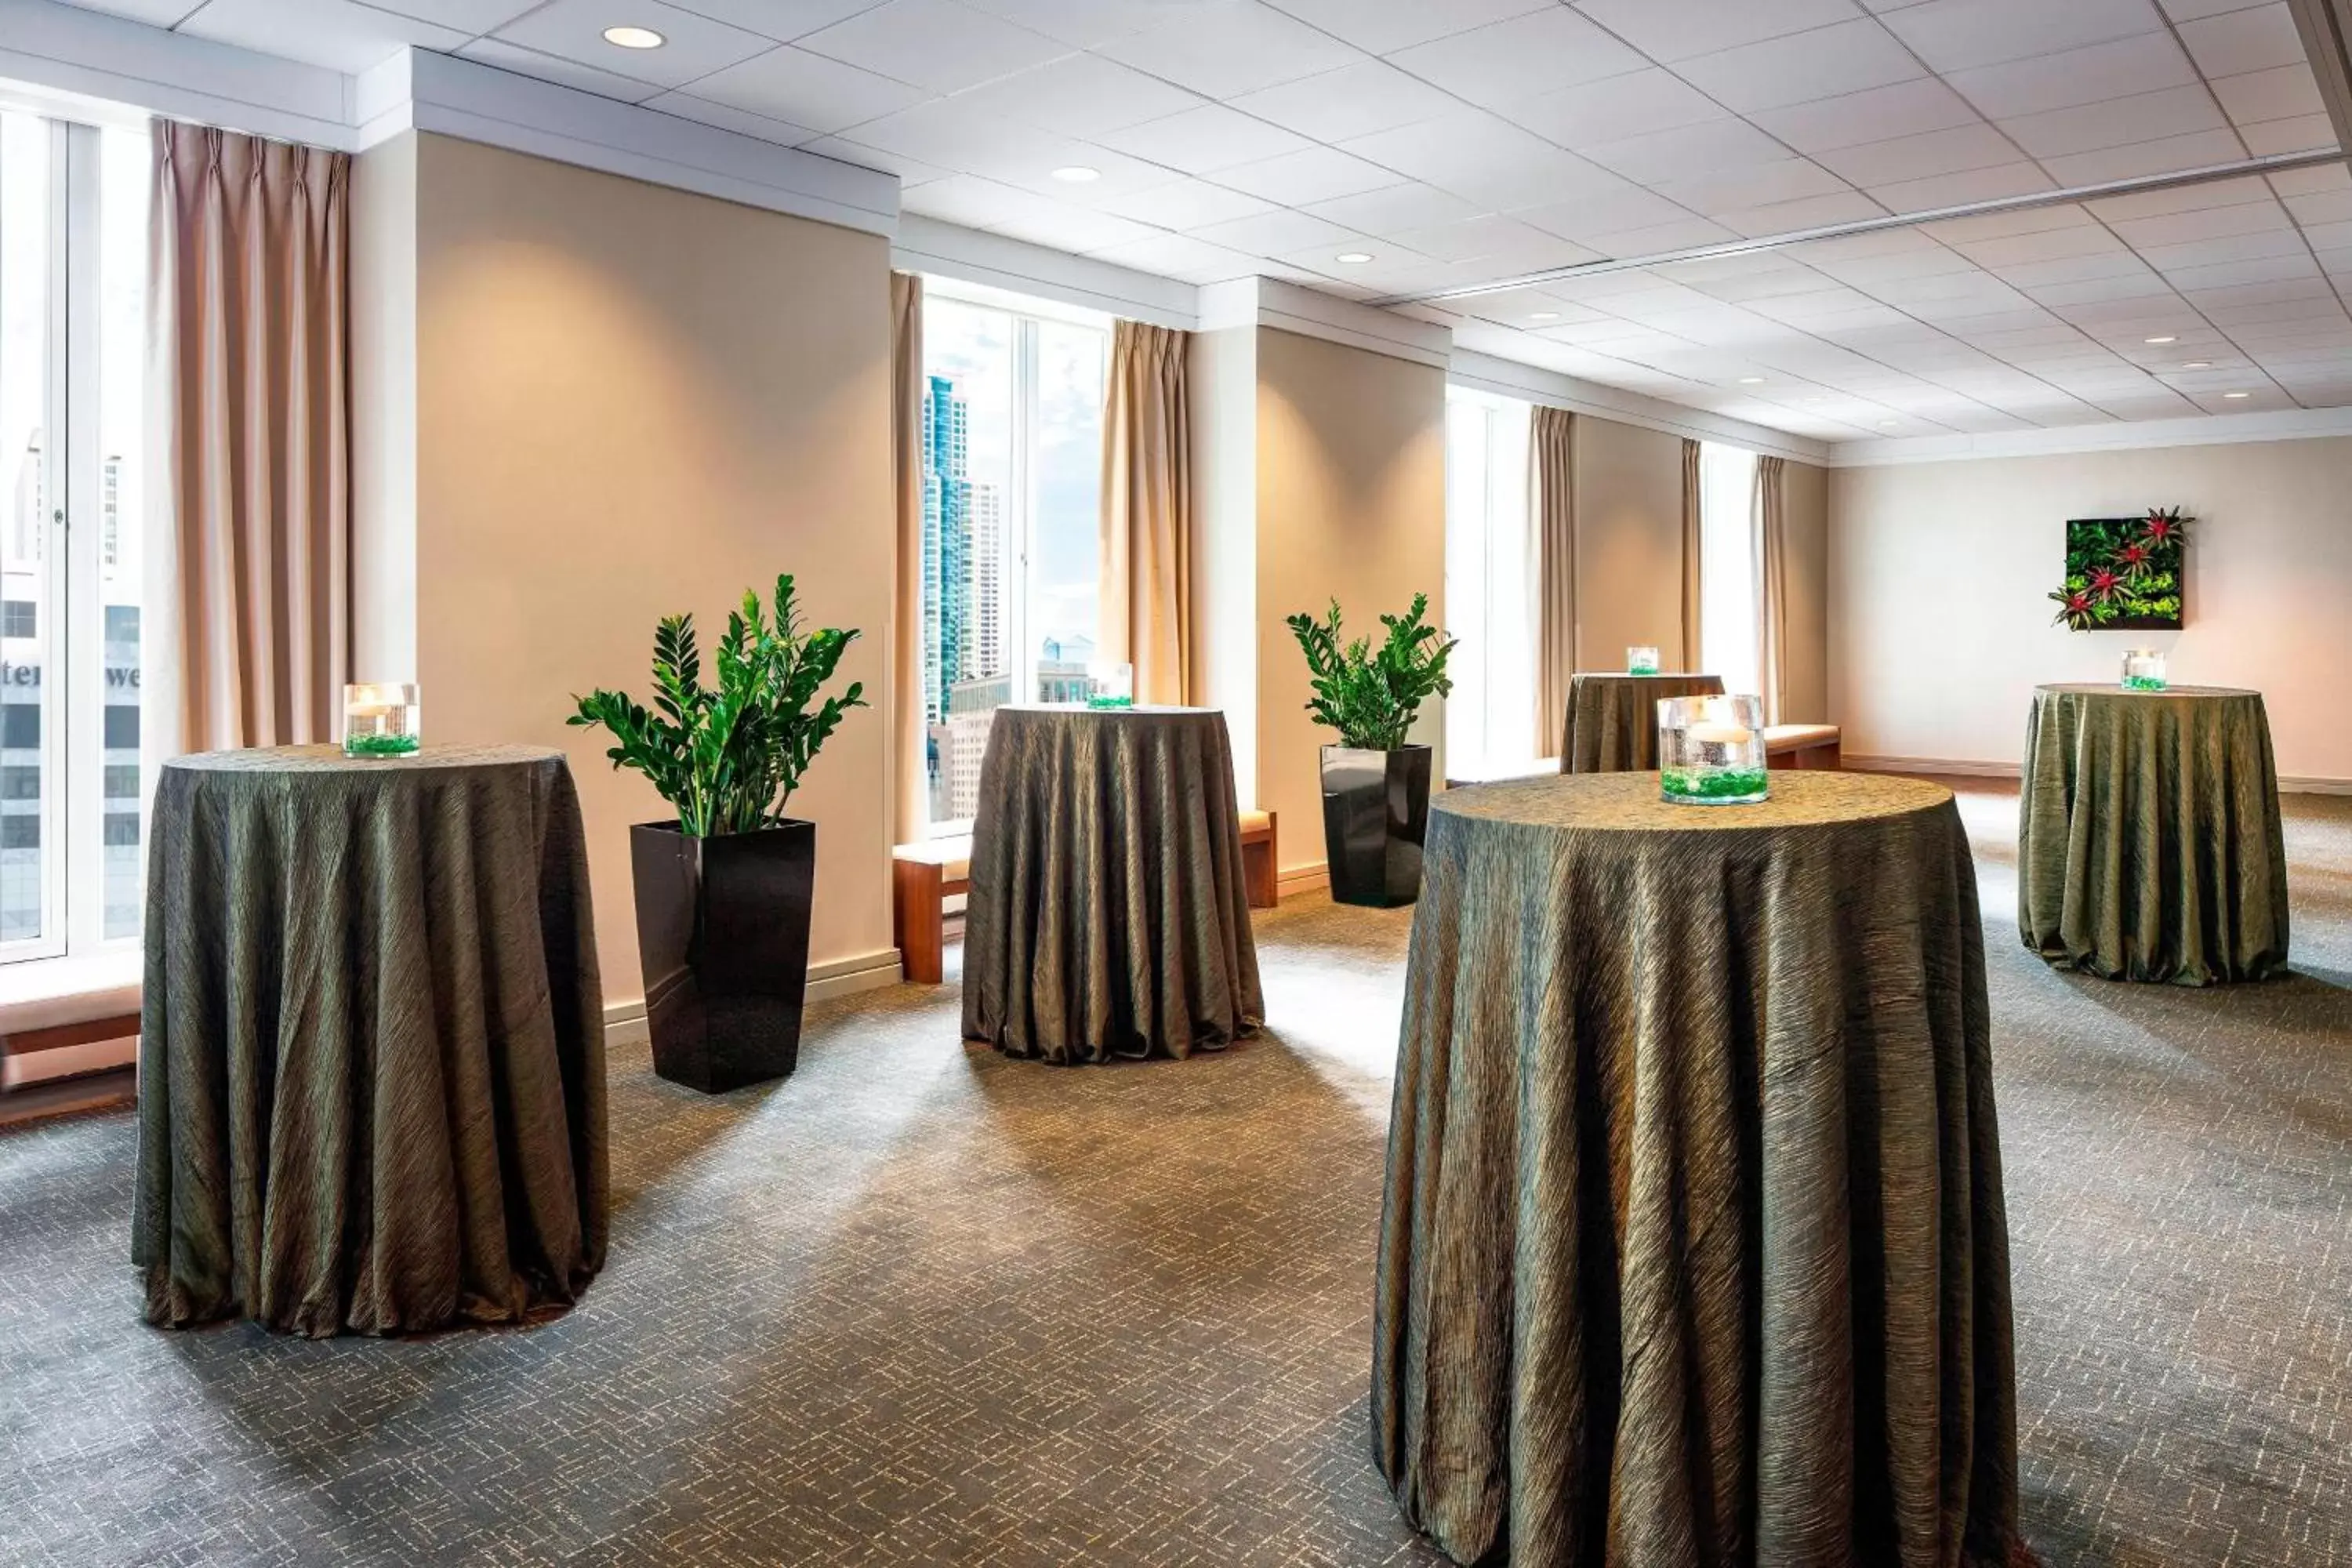 Meeting/conference room, Banquet Facilities in The Westin Michigan Avenue Chicago